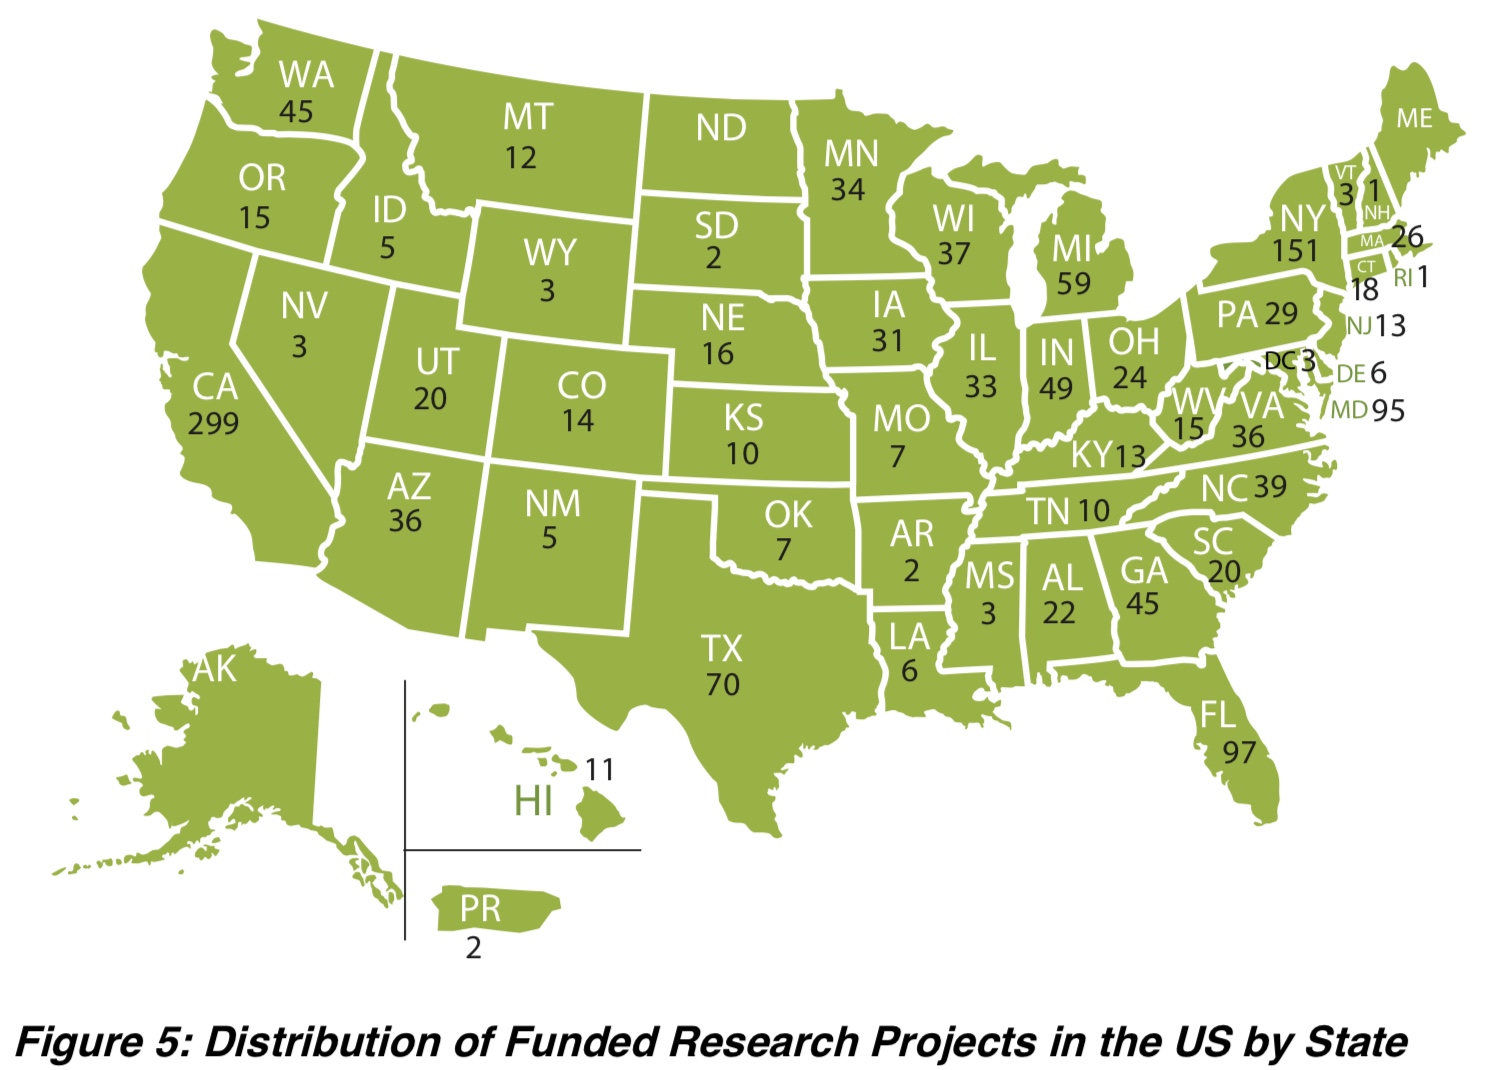 Figure 5: Distribution of Funded Research Projects by State